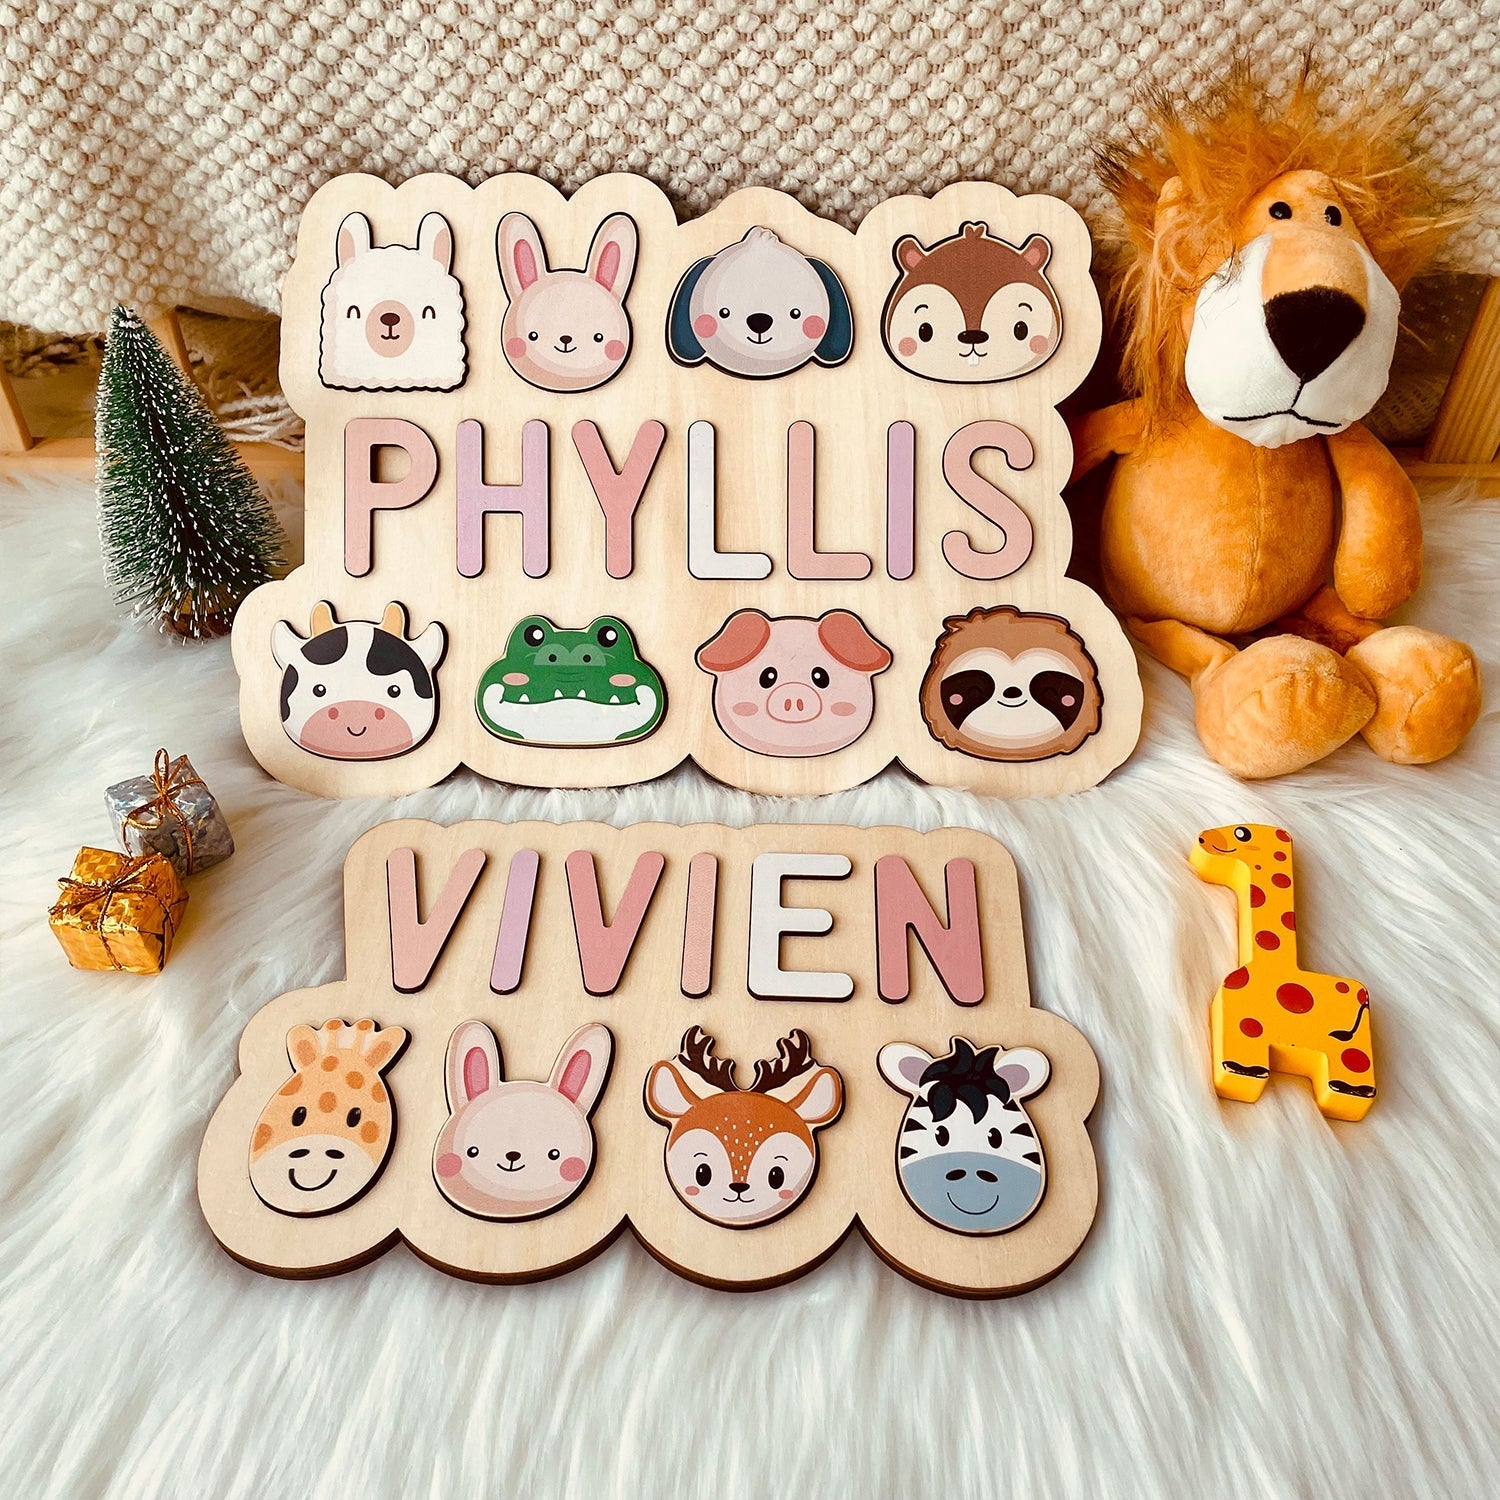 Personalised Wooden Baby Name Puzzle - Outlines Product Name: Personalized Wooden Name Puzzle For Baby Gift Material: Eco-Friendly Plywood BasswoodLetters Available: Up to 10Engraving Messages: AvailableNon-Toxic: YesNon-Harmful: Yes Color: Pastel-boy; Pa